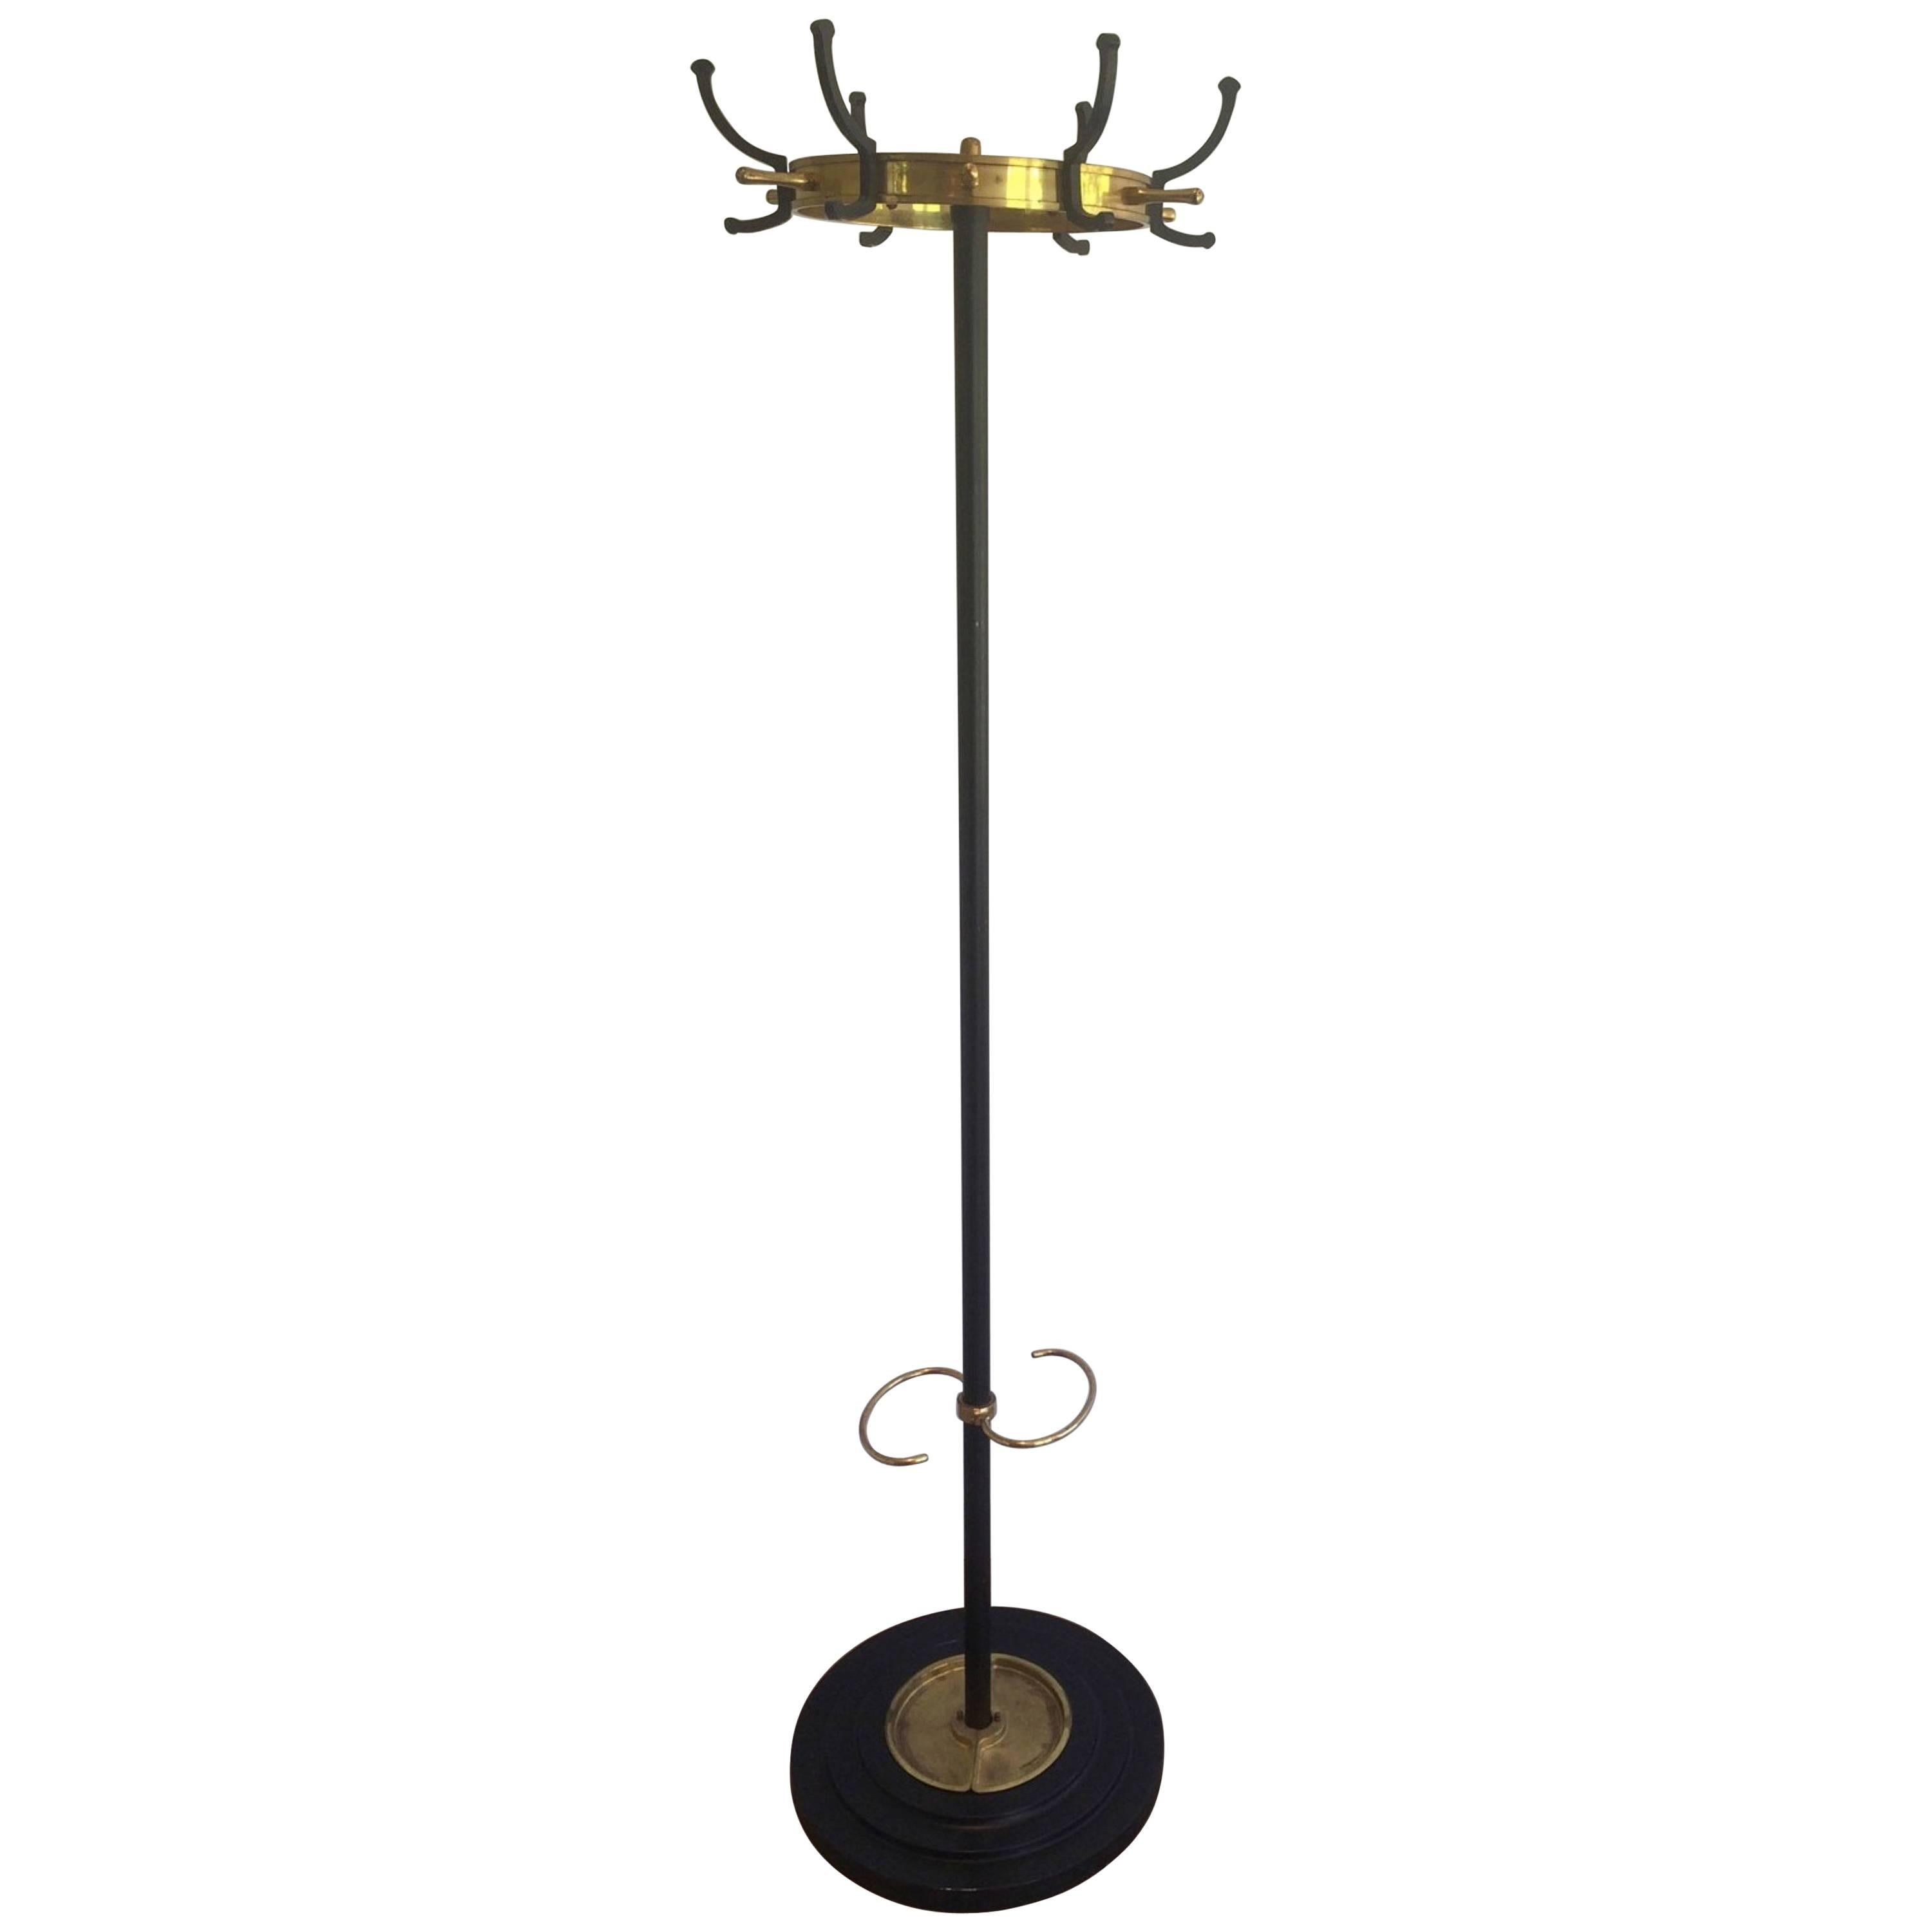 1940s French Brass and Steel Coat Rack by Jacques Adnet